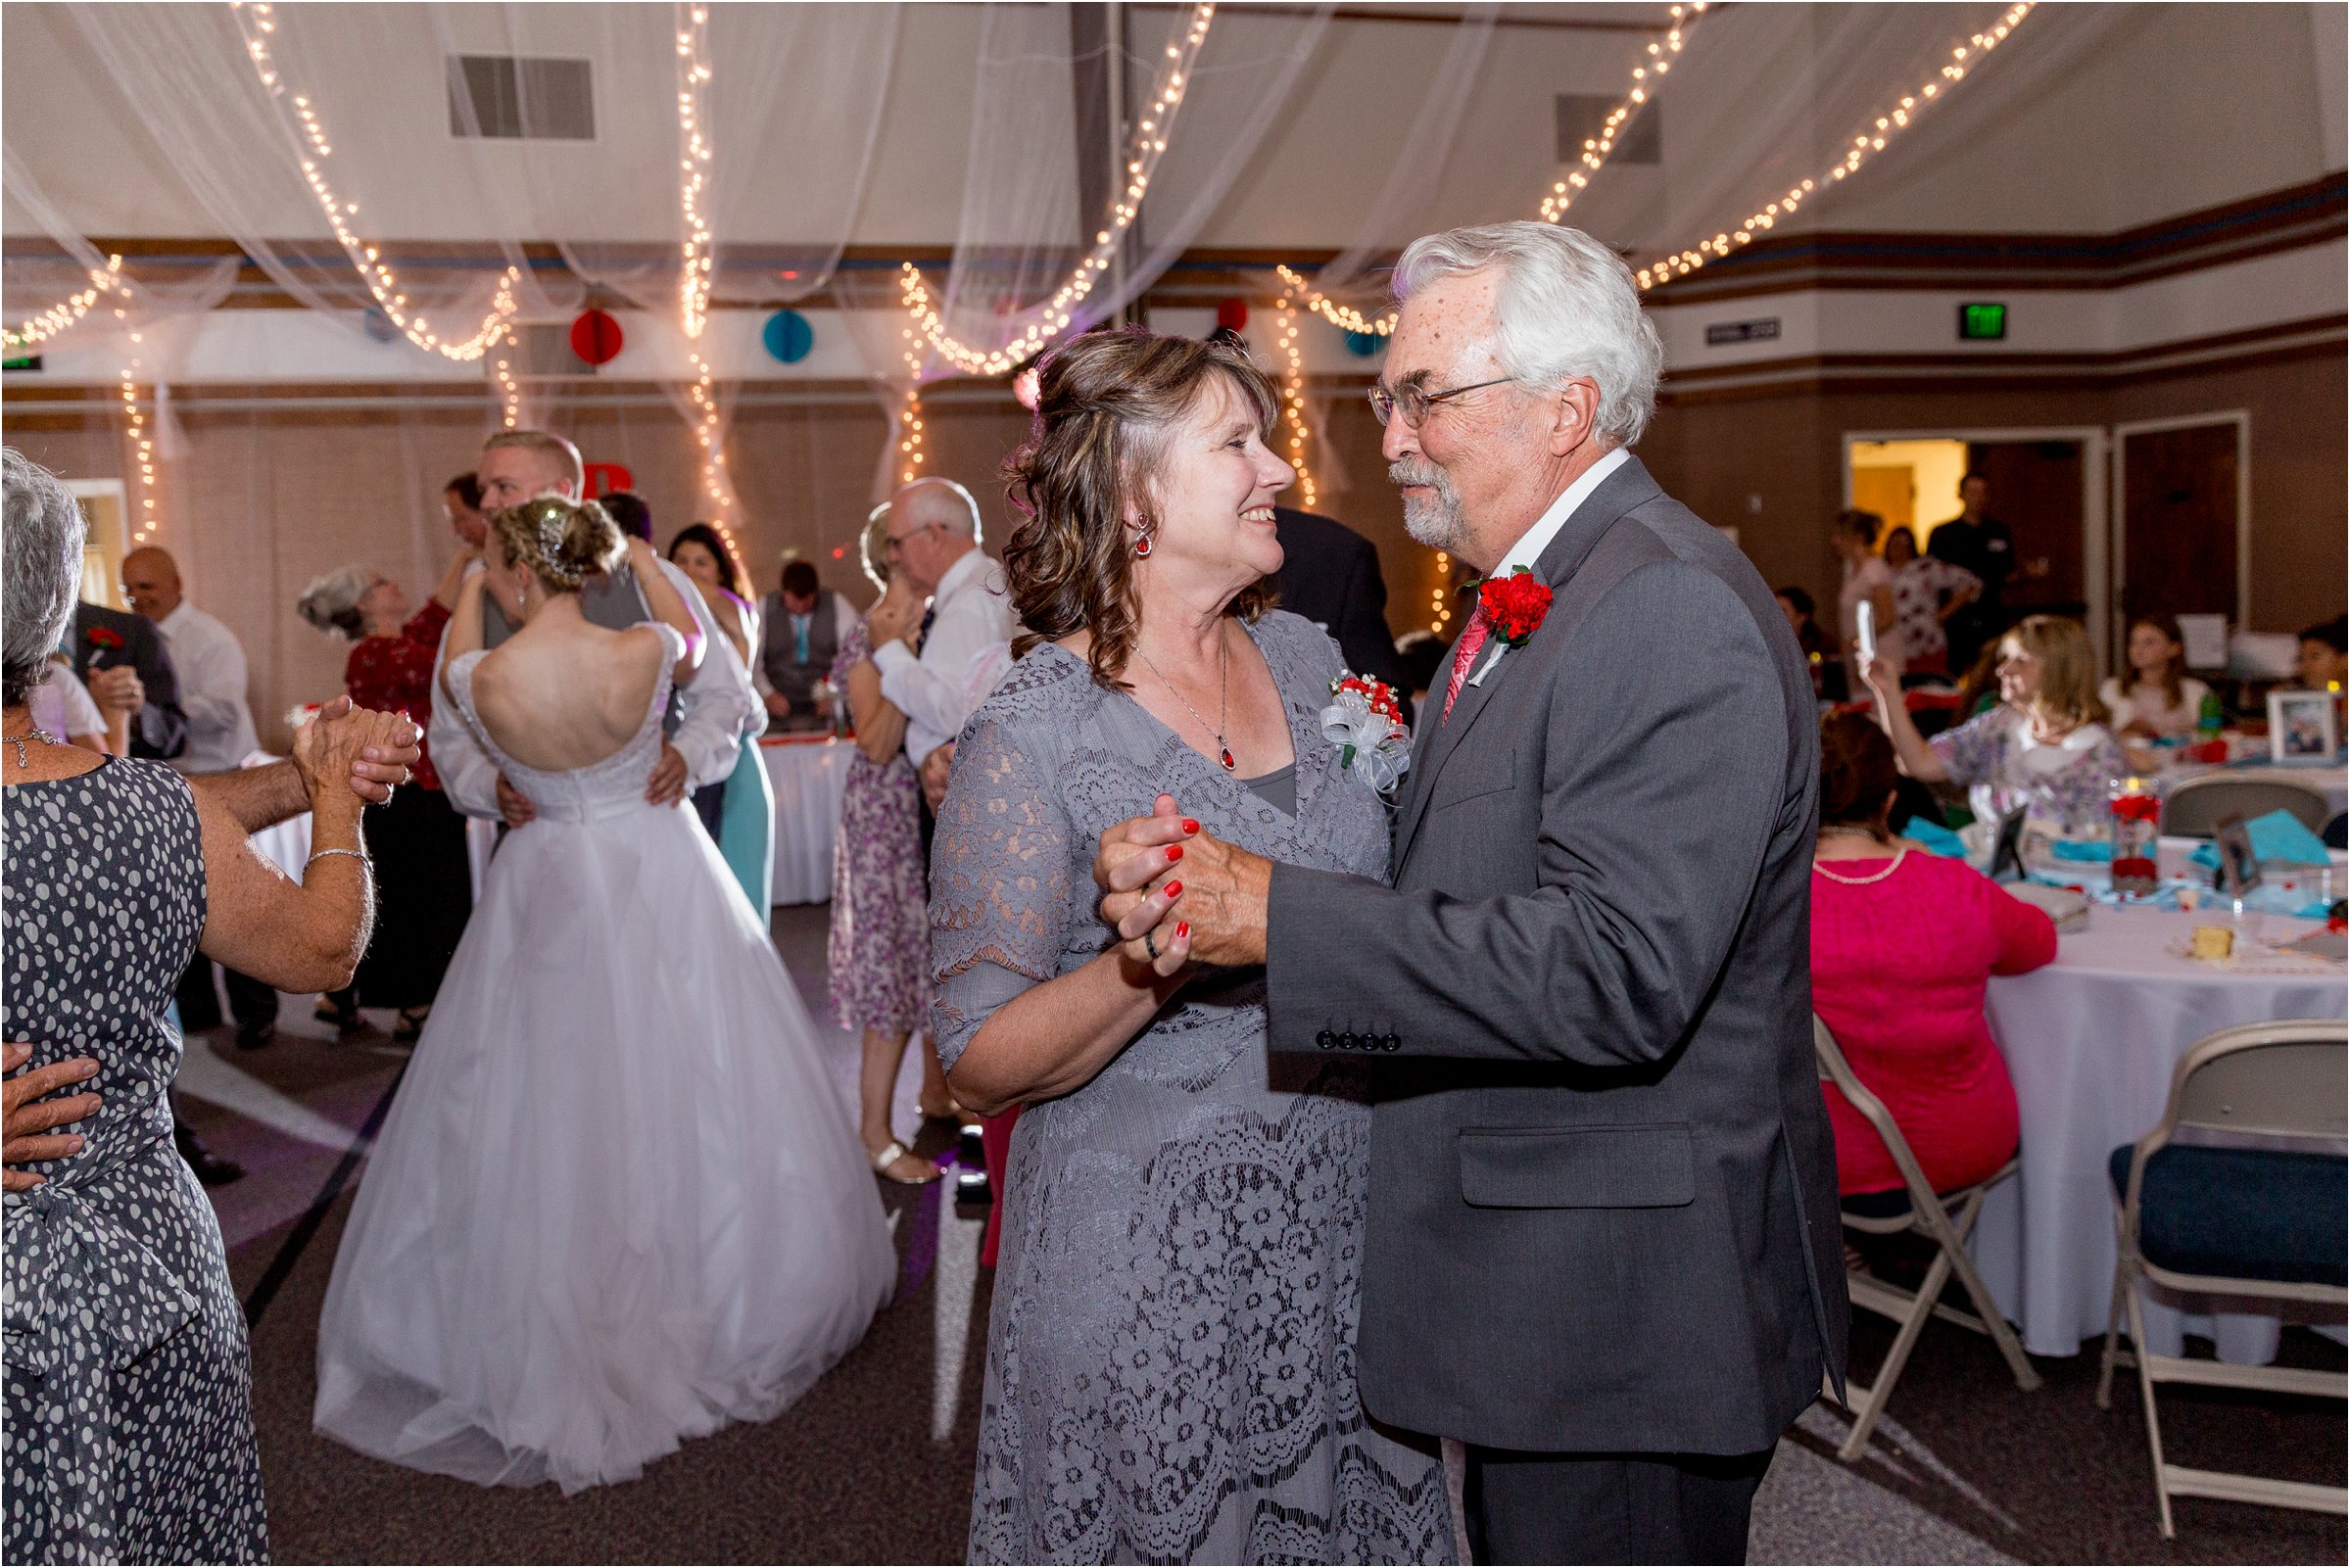 bride's parents dance together at their daughter's wedding reception